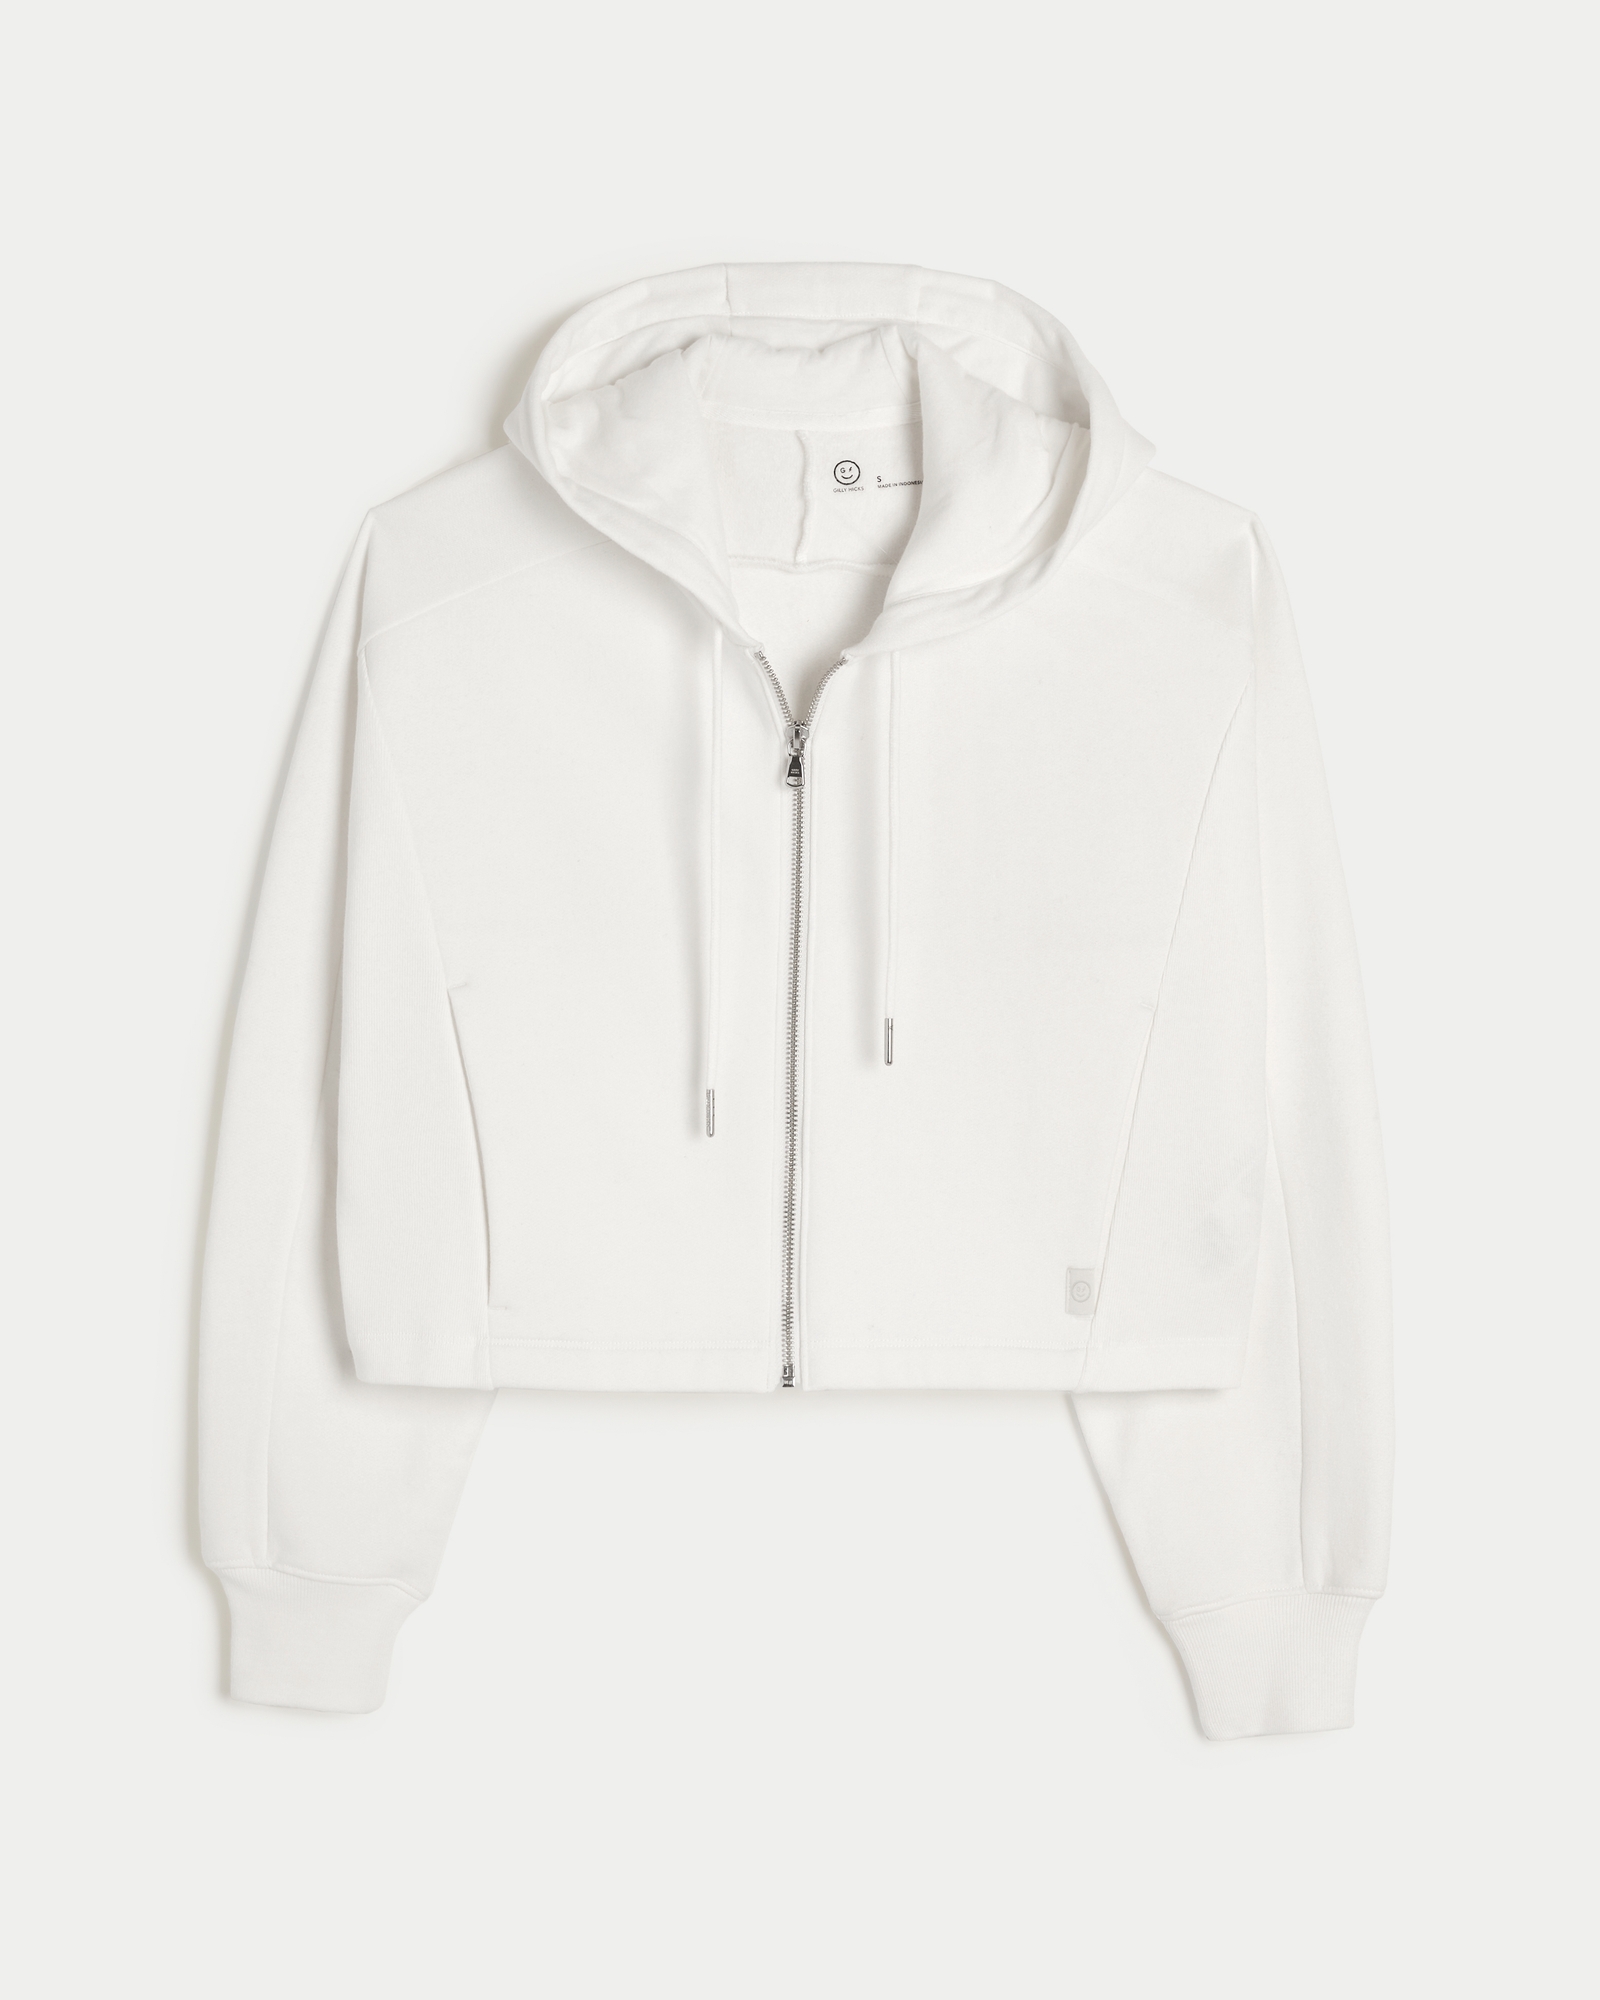 https://img.hollisterco.com/is/image/anf/KIC_515-3035-0021-101_prod1.jpg?policy=product-extra-large